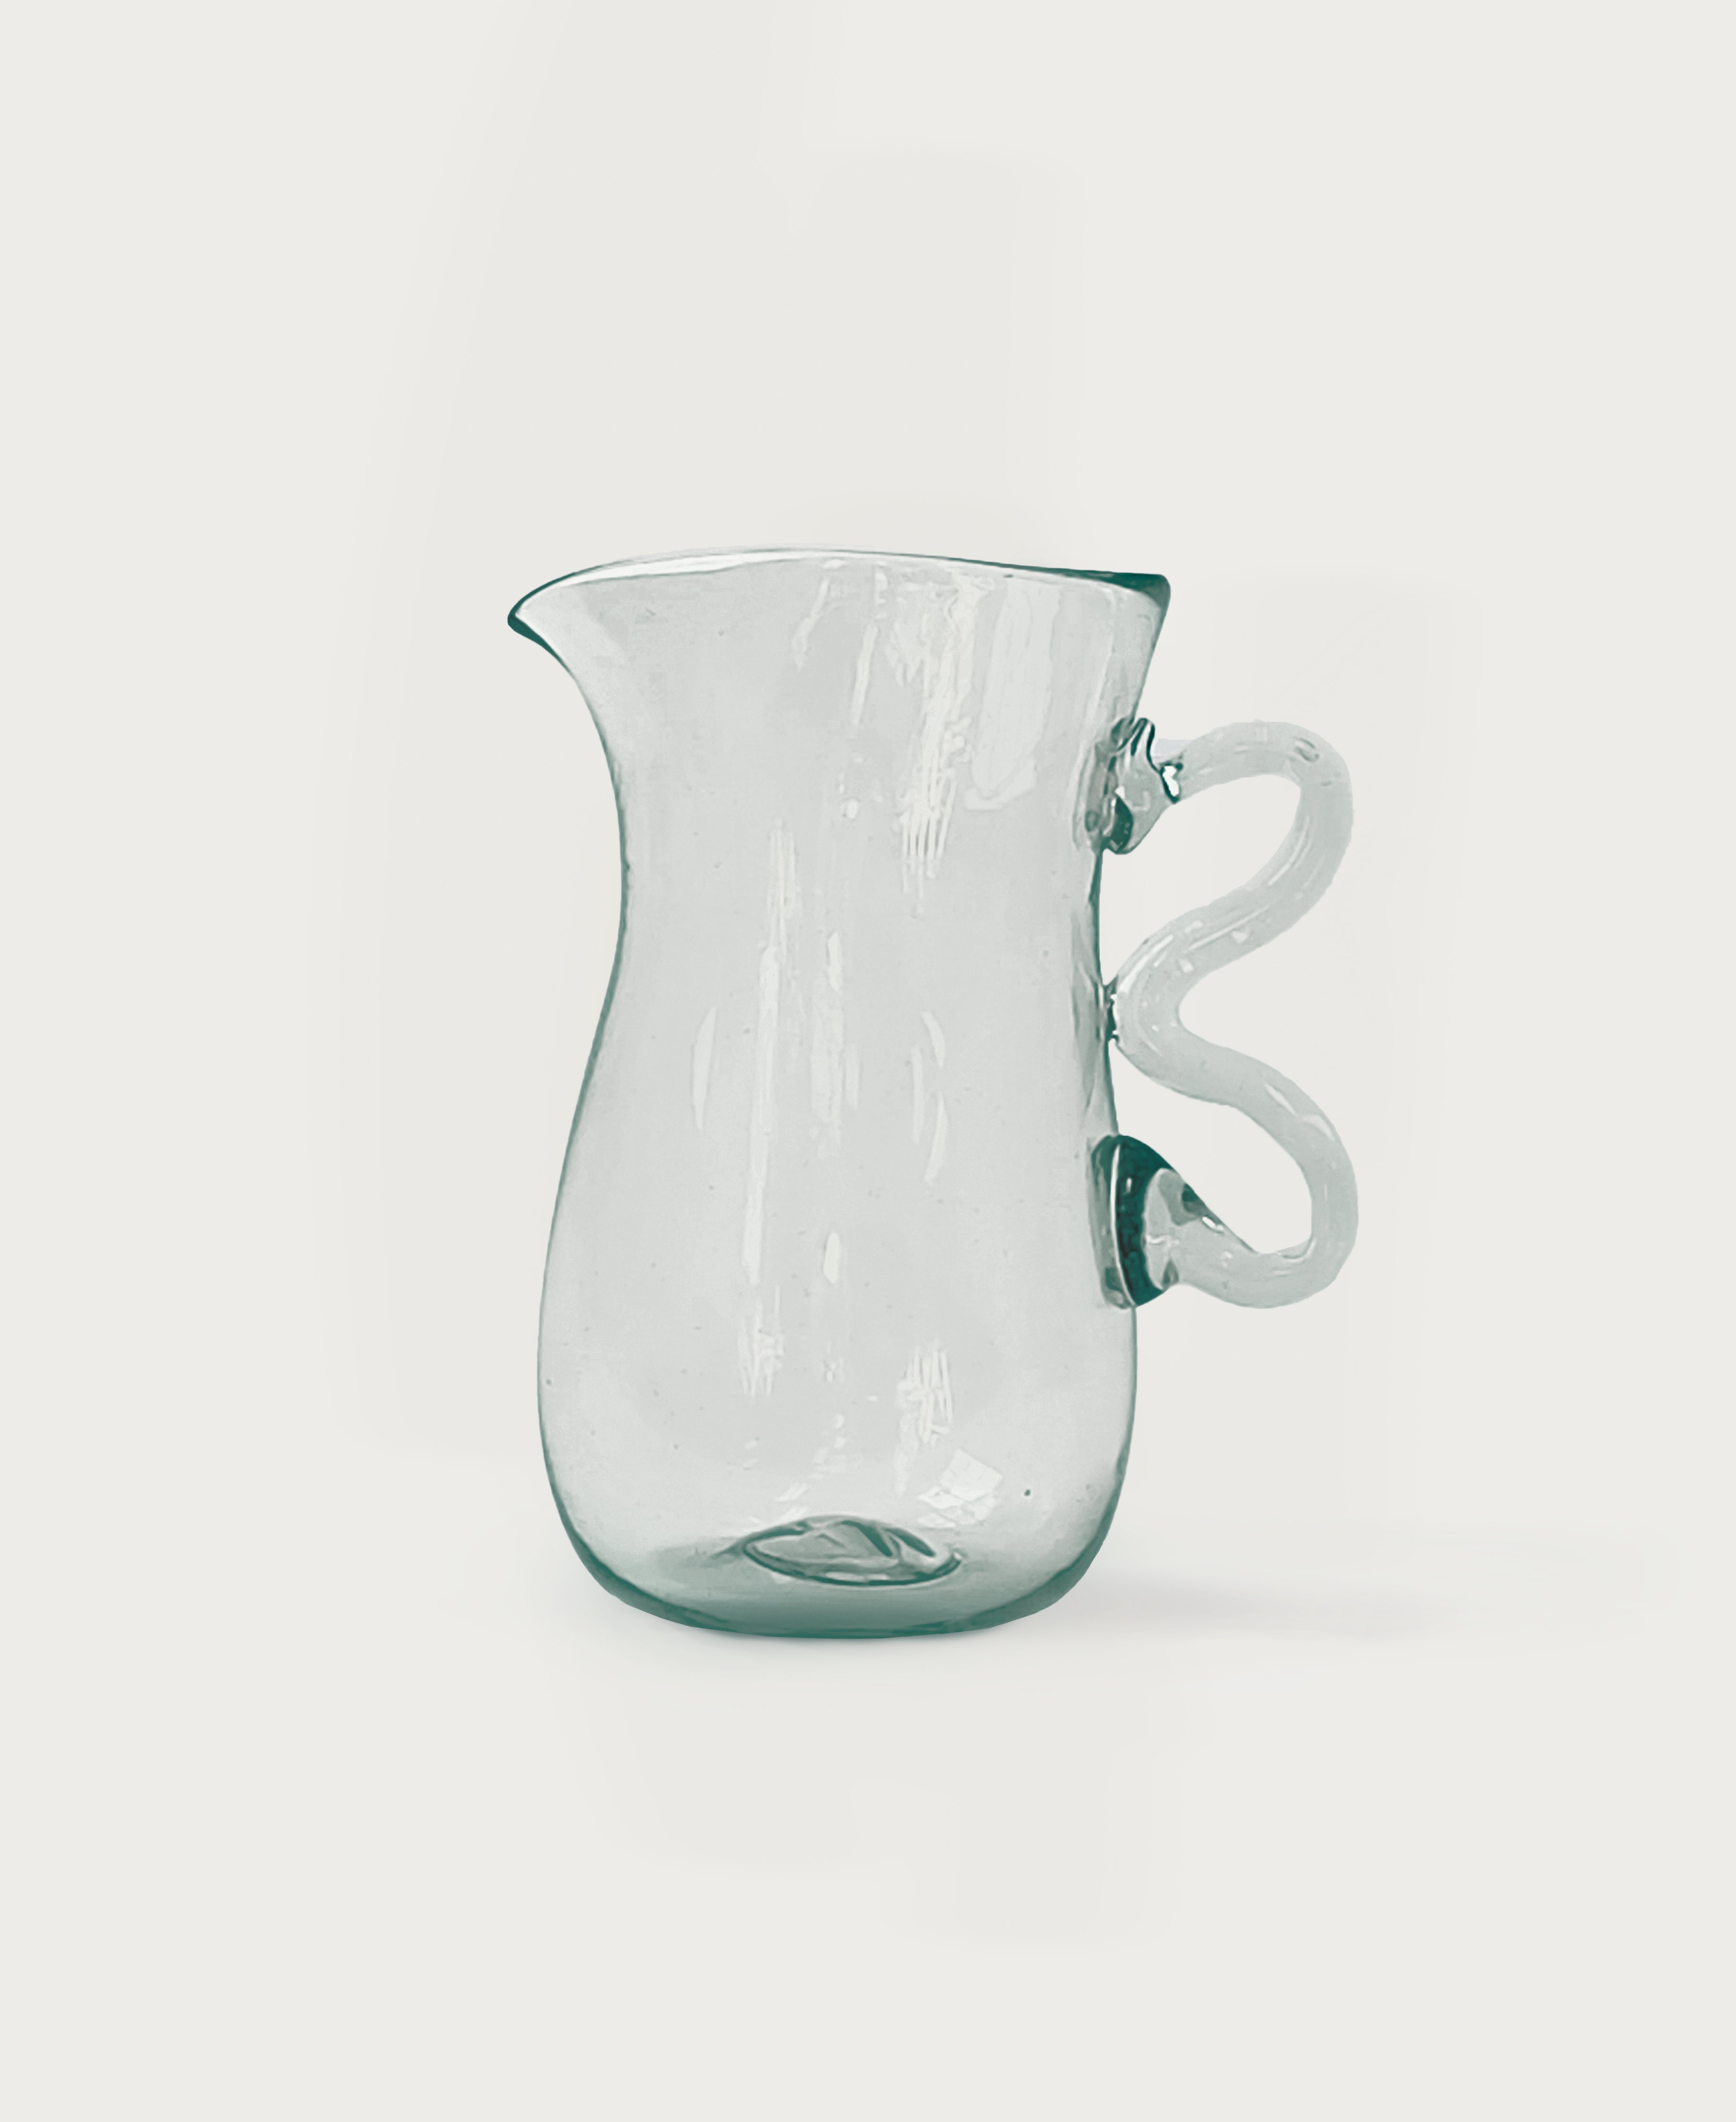   Double Handled Pitcher  